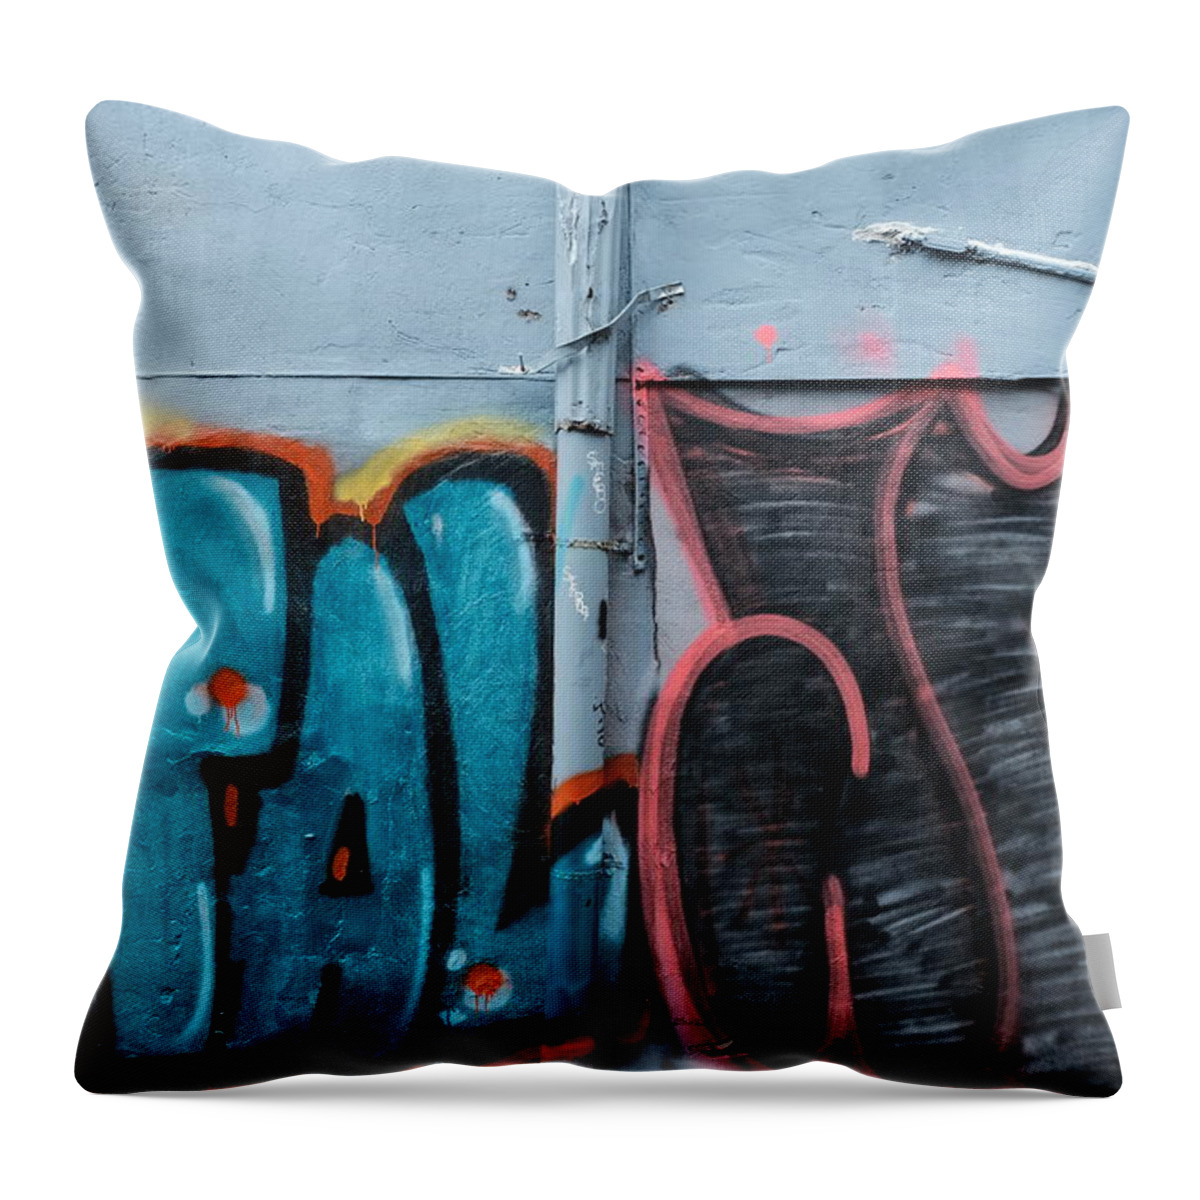 Urban Throw Pillow featuring the photograph Broken In Four by Kreddible Trout